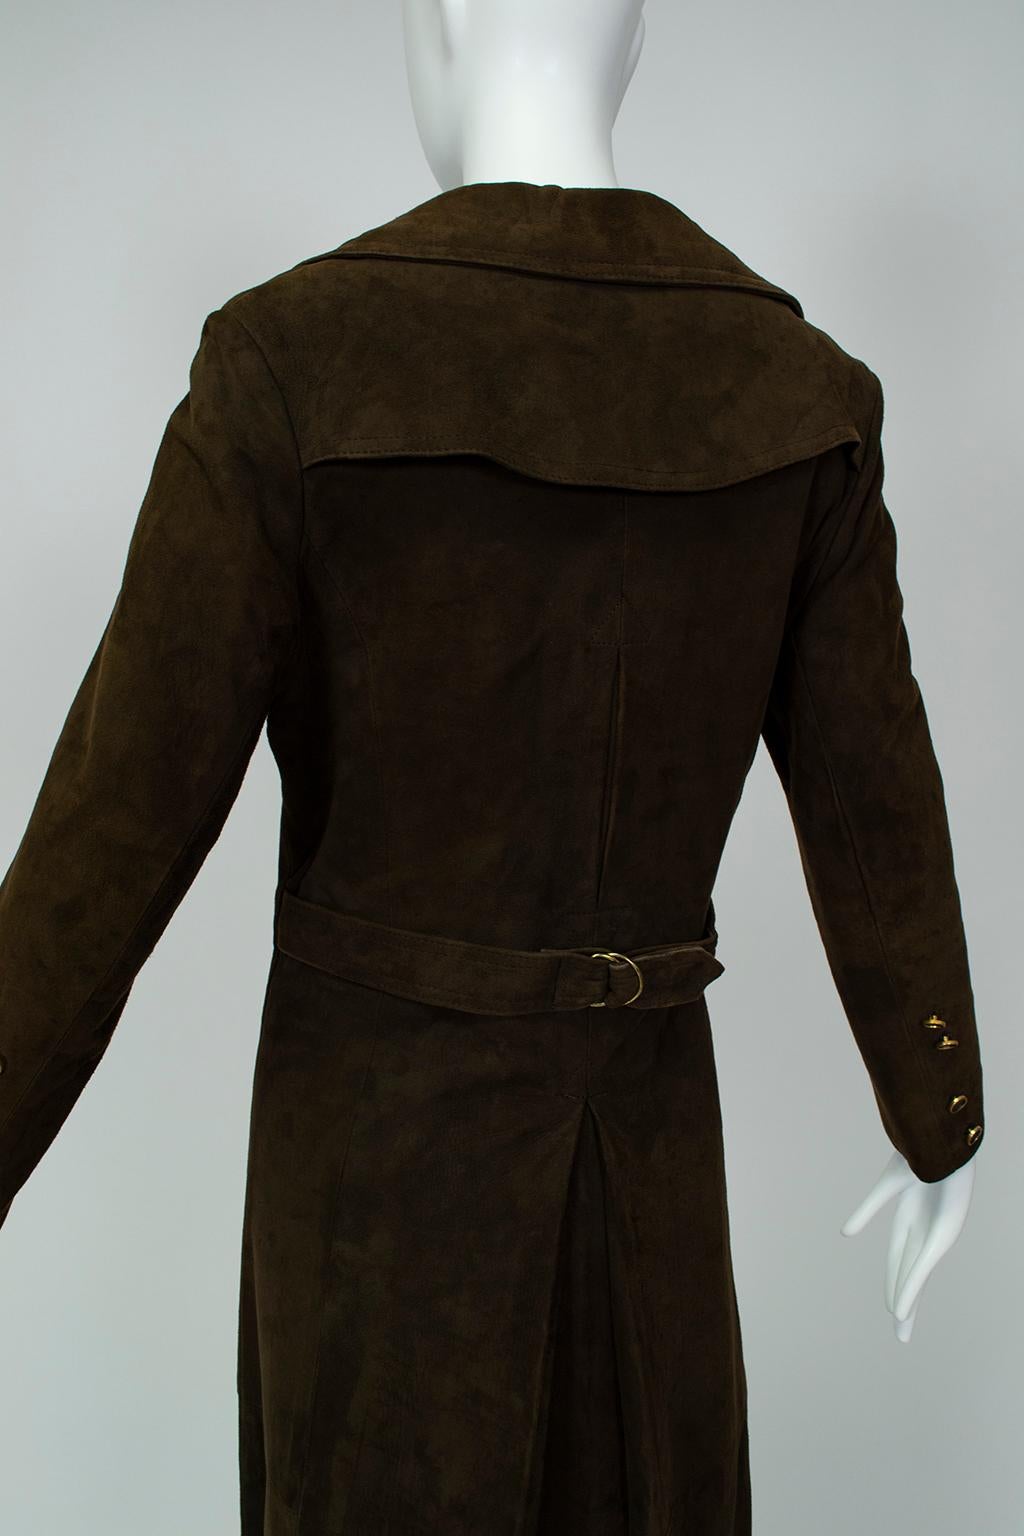 Black Chocolate Brown Suede Full-Length Military Princess Trench Coat - S-M, 1970s For Sale